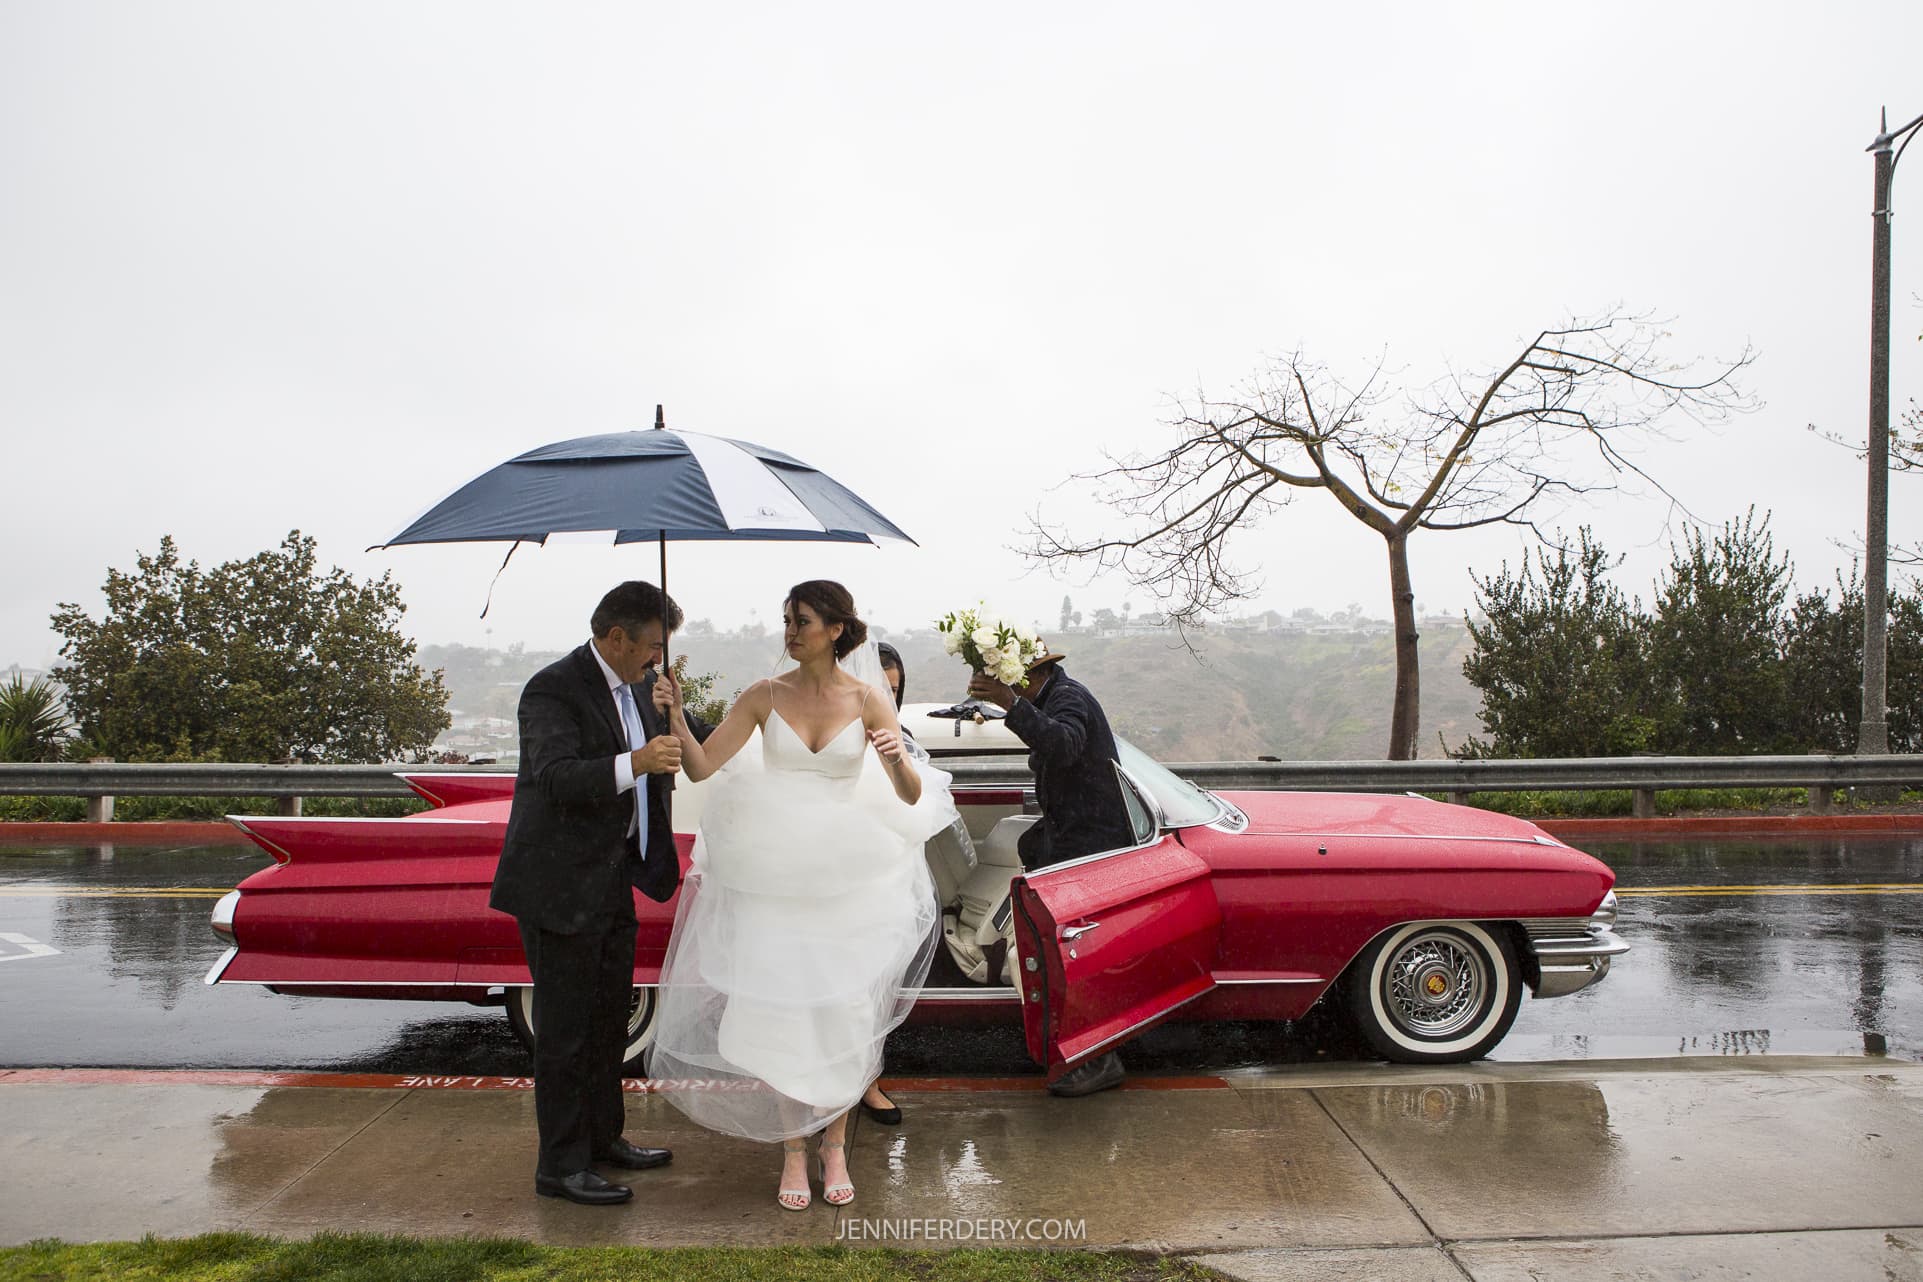 bride exiting a red convertible classic car in the rain. she is wearing a long white wedding dress, the car is parked on a wet road and her dad is helping her with a big golf umbrella